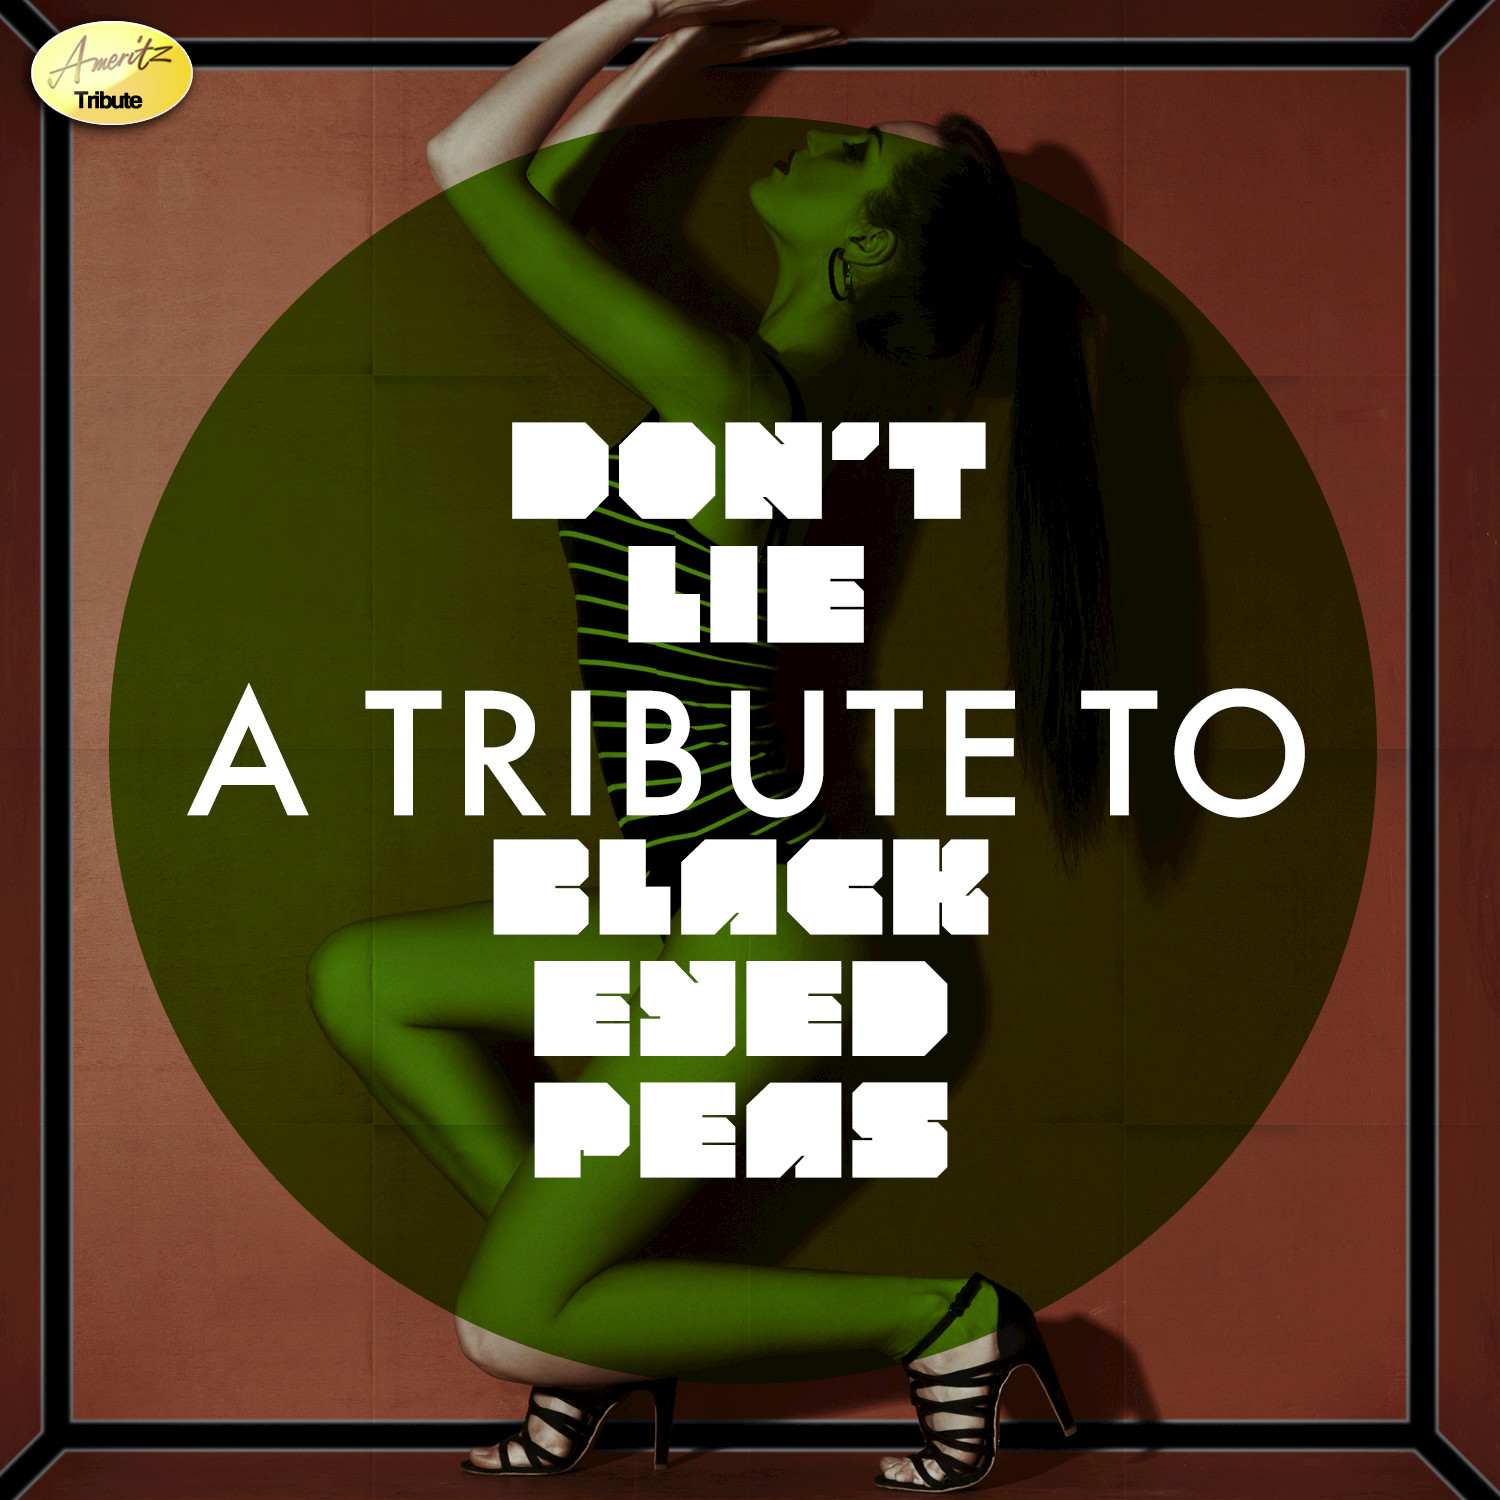 Don't Lie - A Tribute to Black Eyed Peas